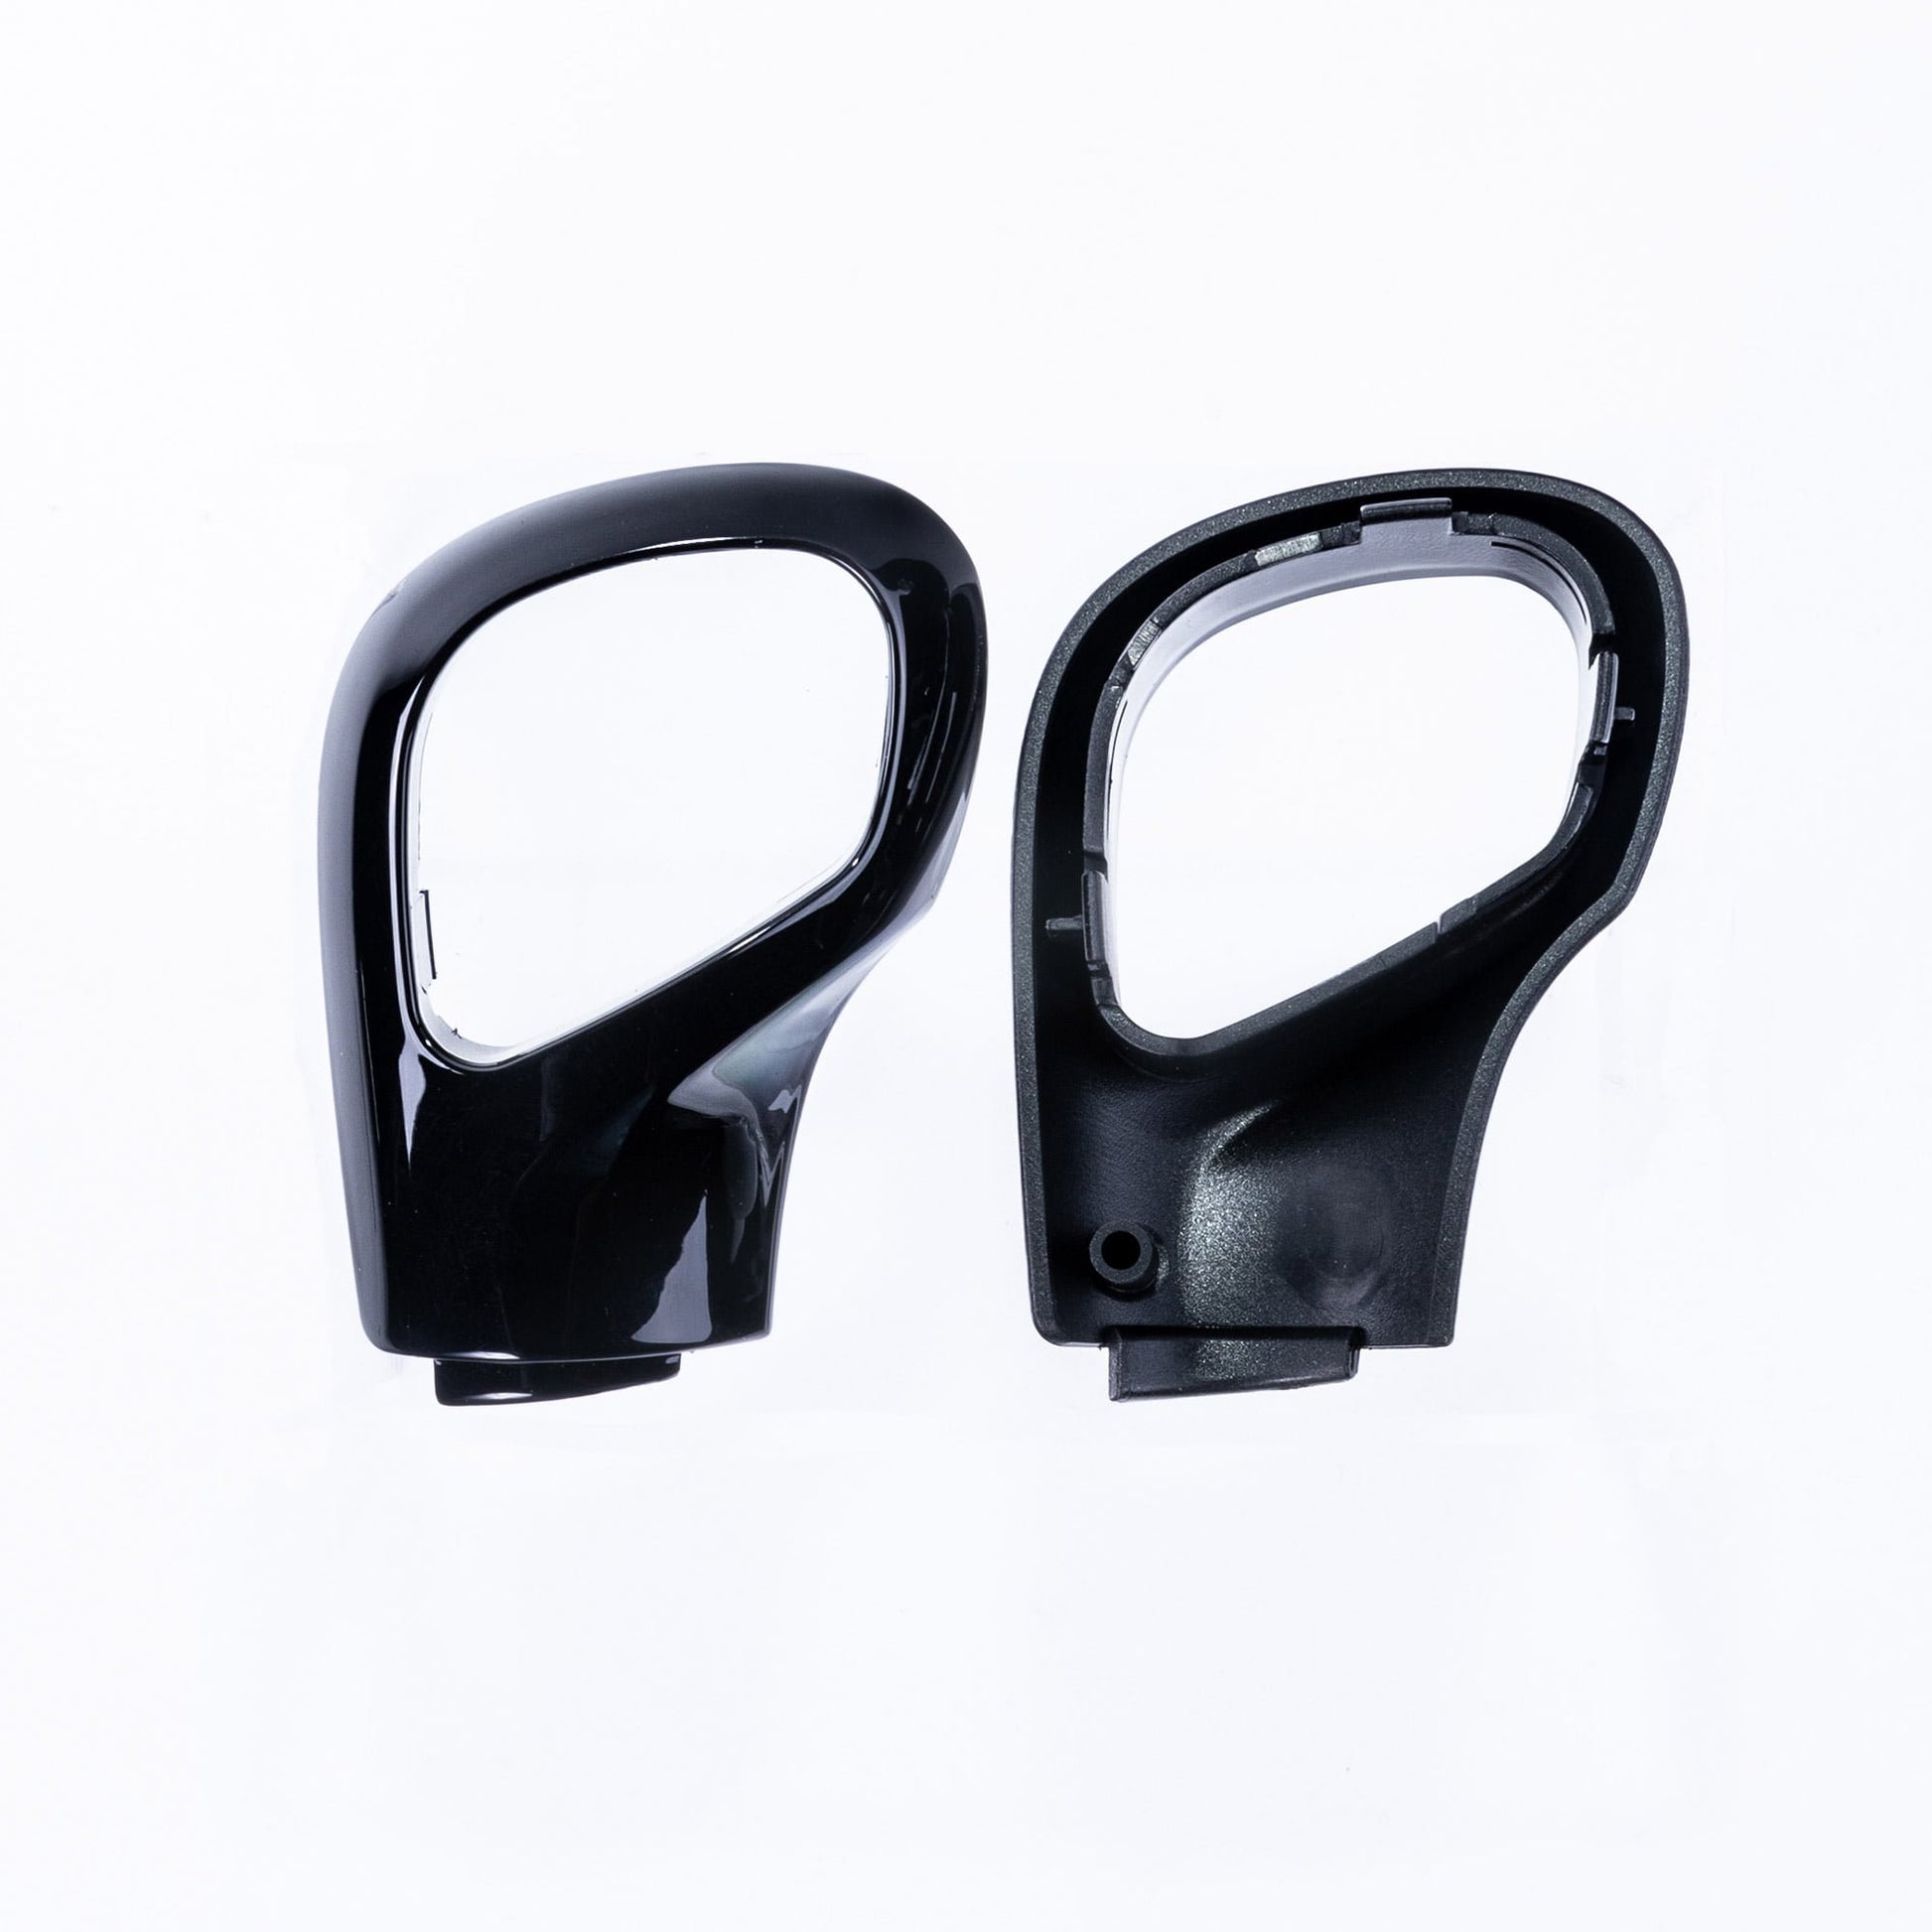 VW T5 Pair of Wing Mirror Covers (PAINTED)